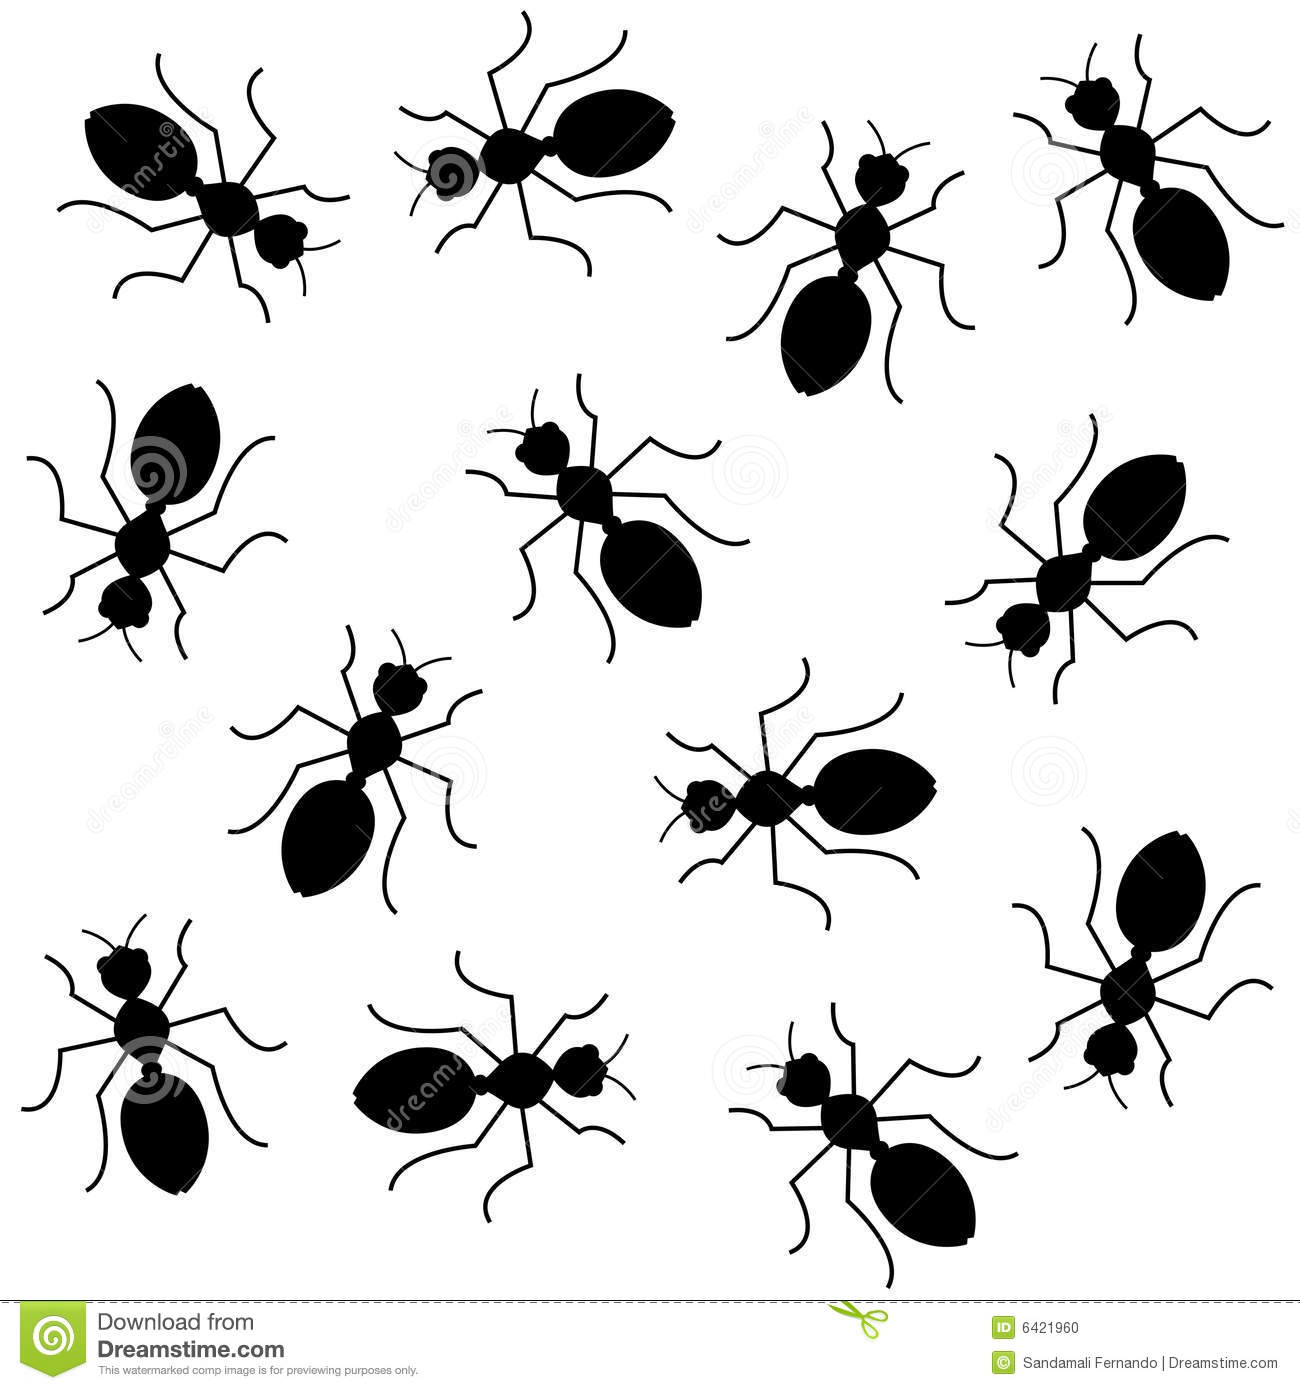 Tiny free collection download. 2 clipart ant